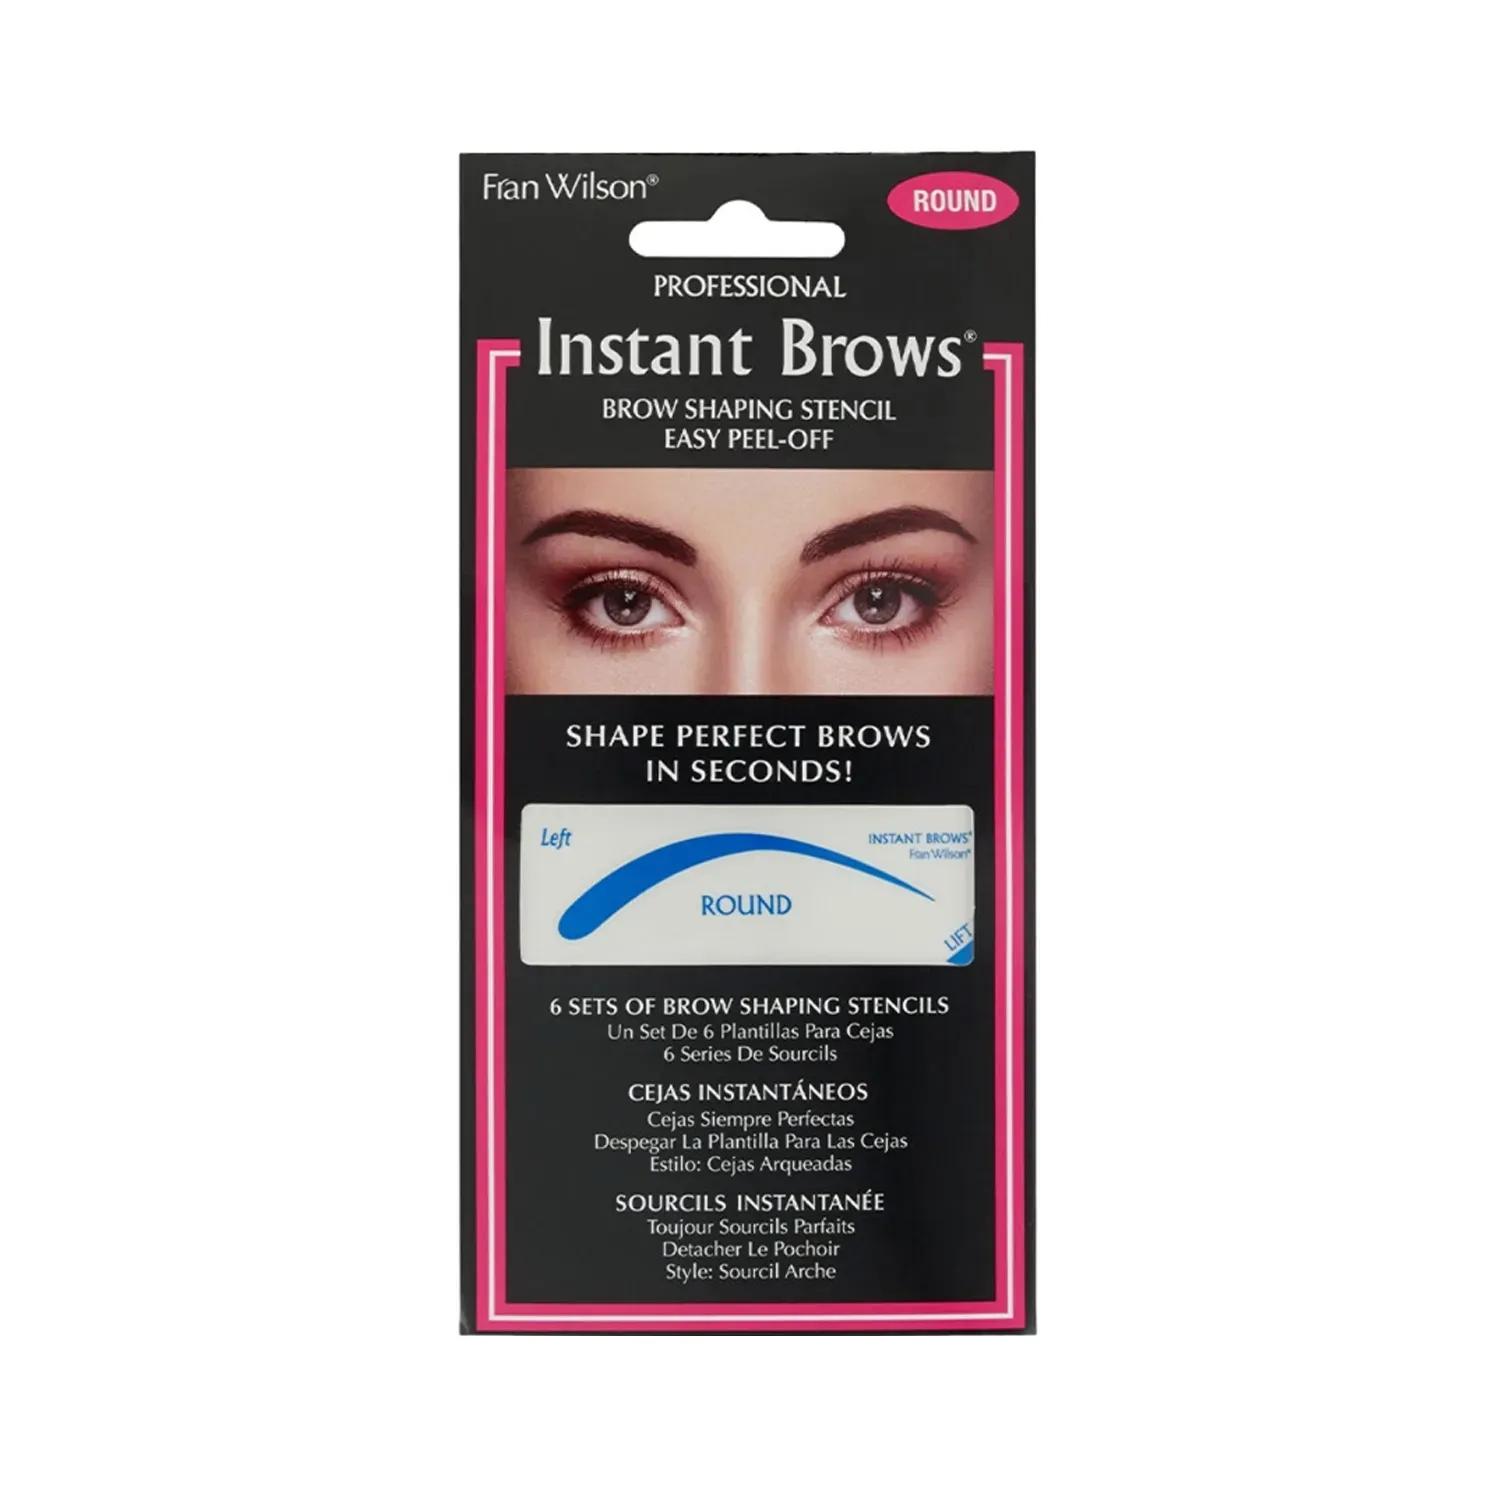 fran-wilson-moodmatcher-instant-brows-shaping-stencil---round-(set-of-6)